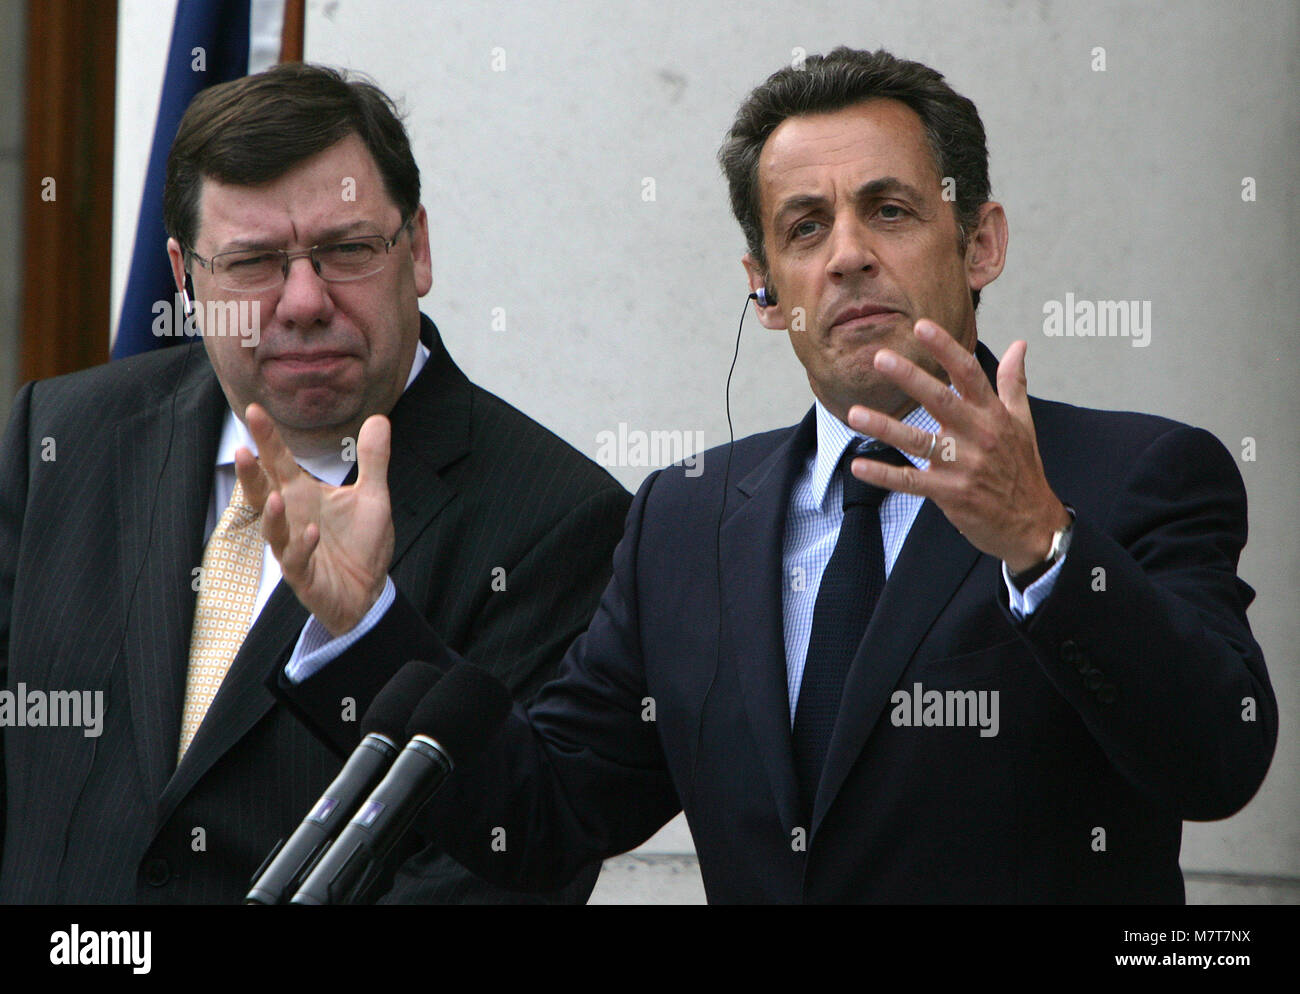 French President Nicolas Sarkozy and Taoiseach Brian Cowen speak to the media outside Government Buildings in Dublin, Monday 21, July 2008. Sarkozy met the two main opposition leaders - Fine Gael's Enda Kenny and Labour's Eamon Gilmore and talks with groups who opposed and supported the Lisbon Treaty. Photo/Paul McErlane Stock Photo